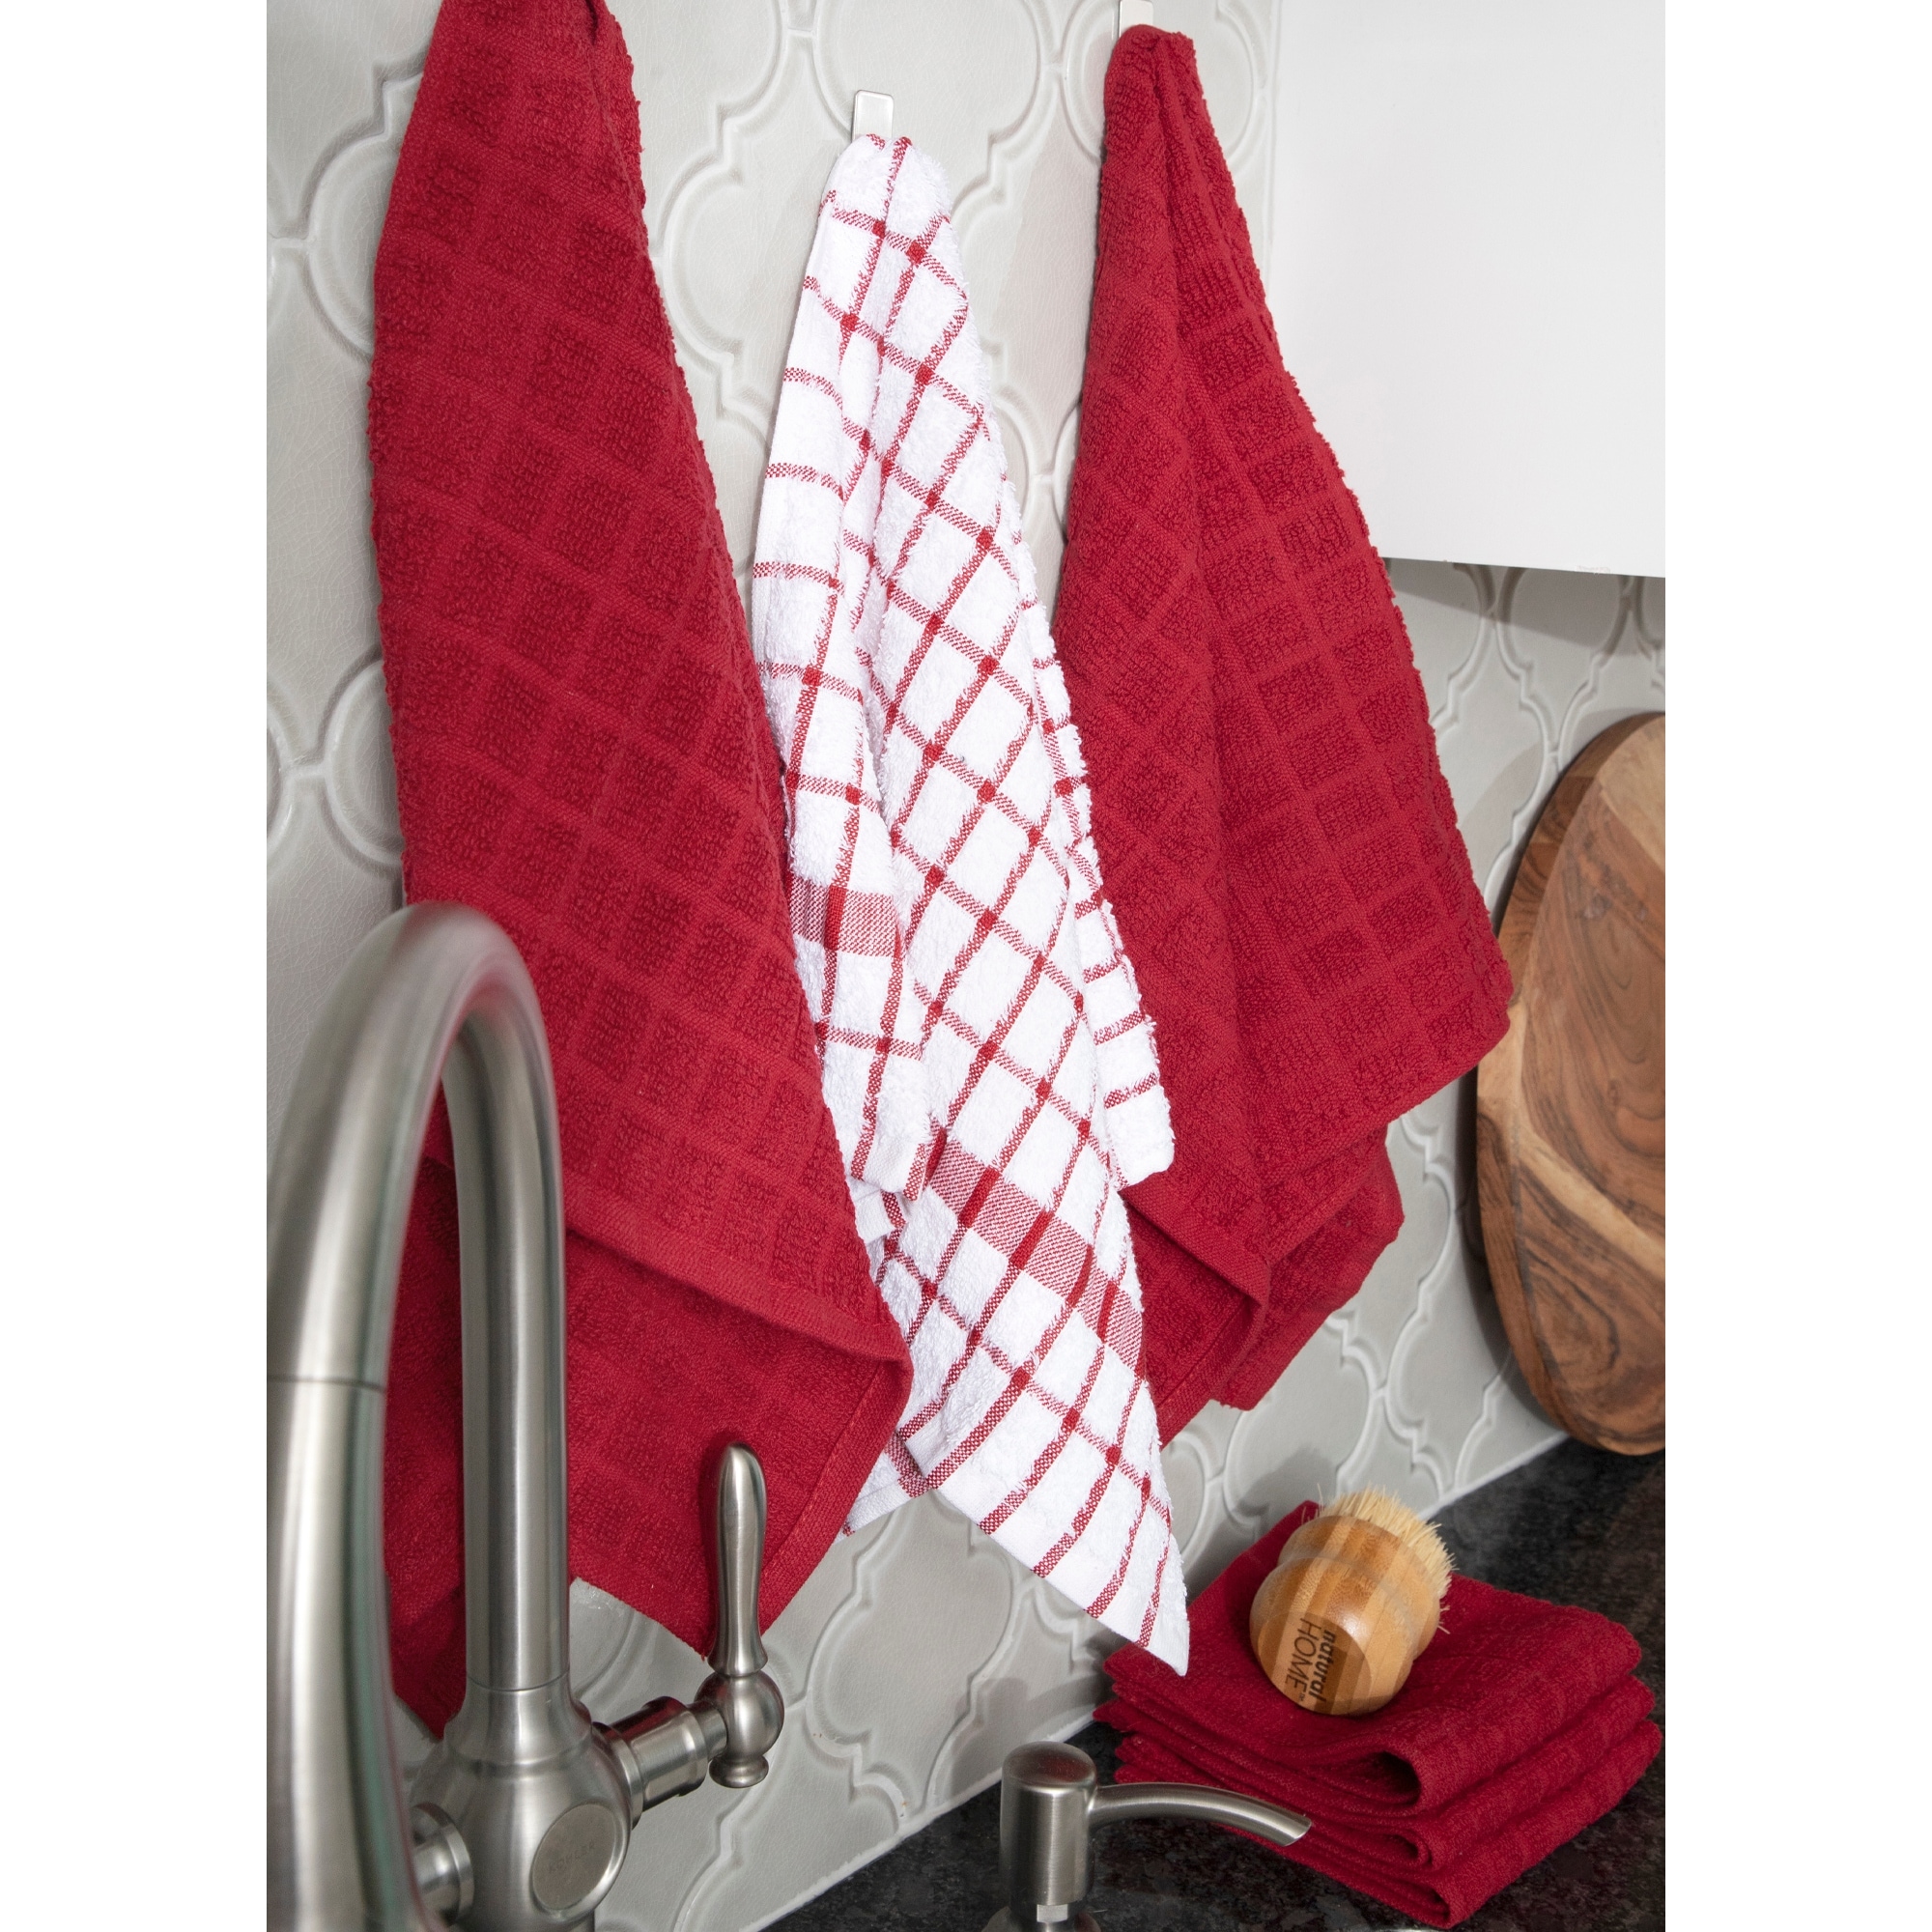 https://ak1.ostkcdn.com/images/products/is/images/direct/6c98e3a5b0c378dc9daa800d21882f89c8ac5415/RITZ-Terry-Kitchen-Towel-and-Dish-Cloth%2C-Set-of-3-Towels-and-3-Dish-Cloths.jpg